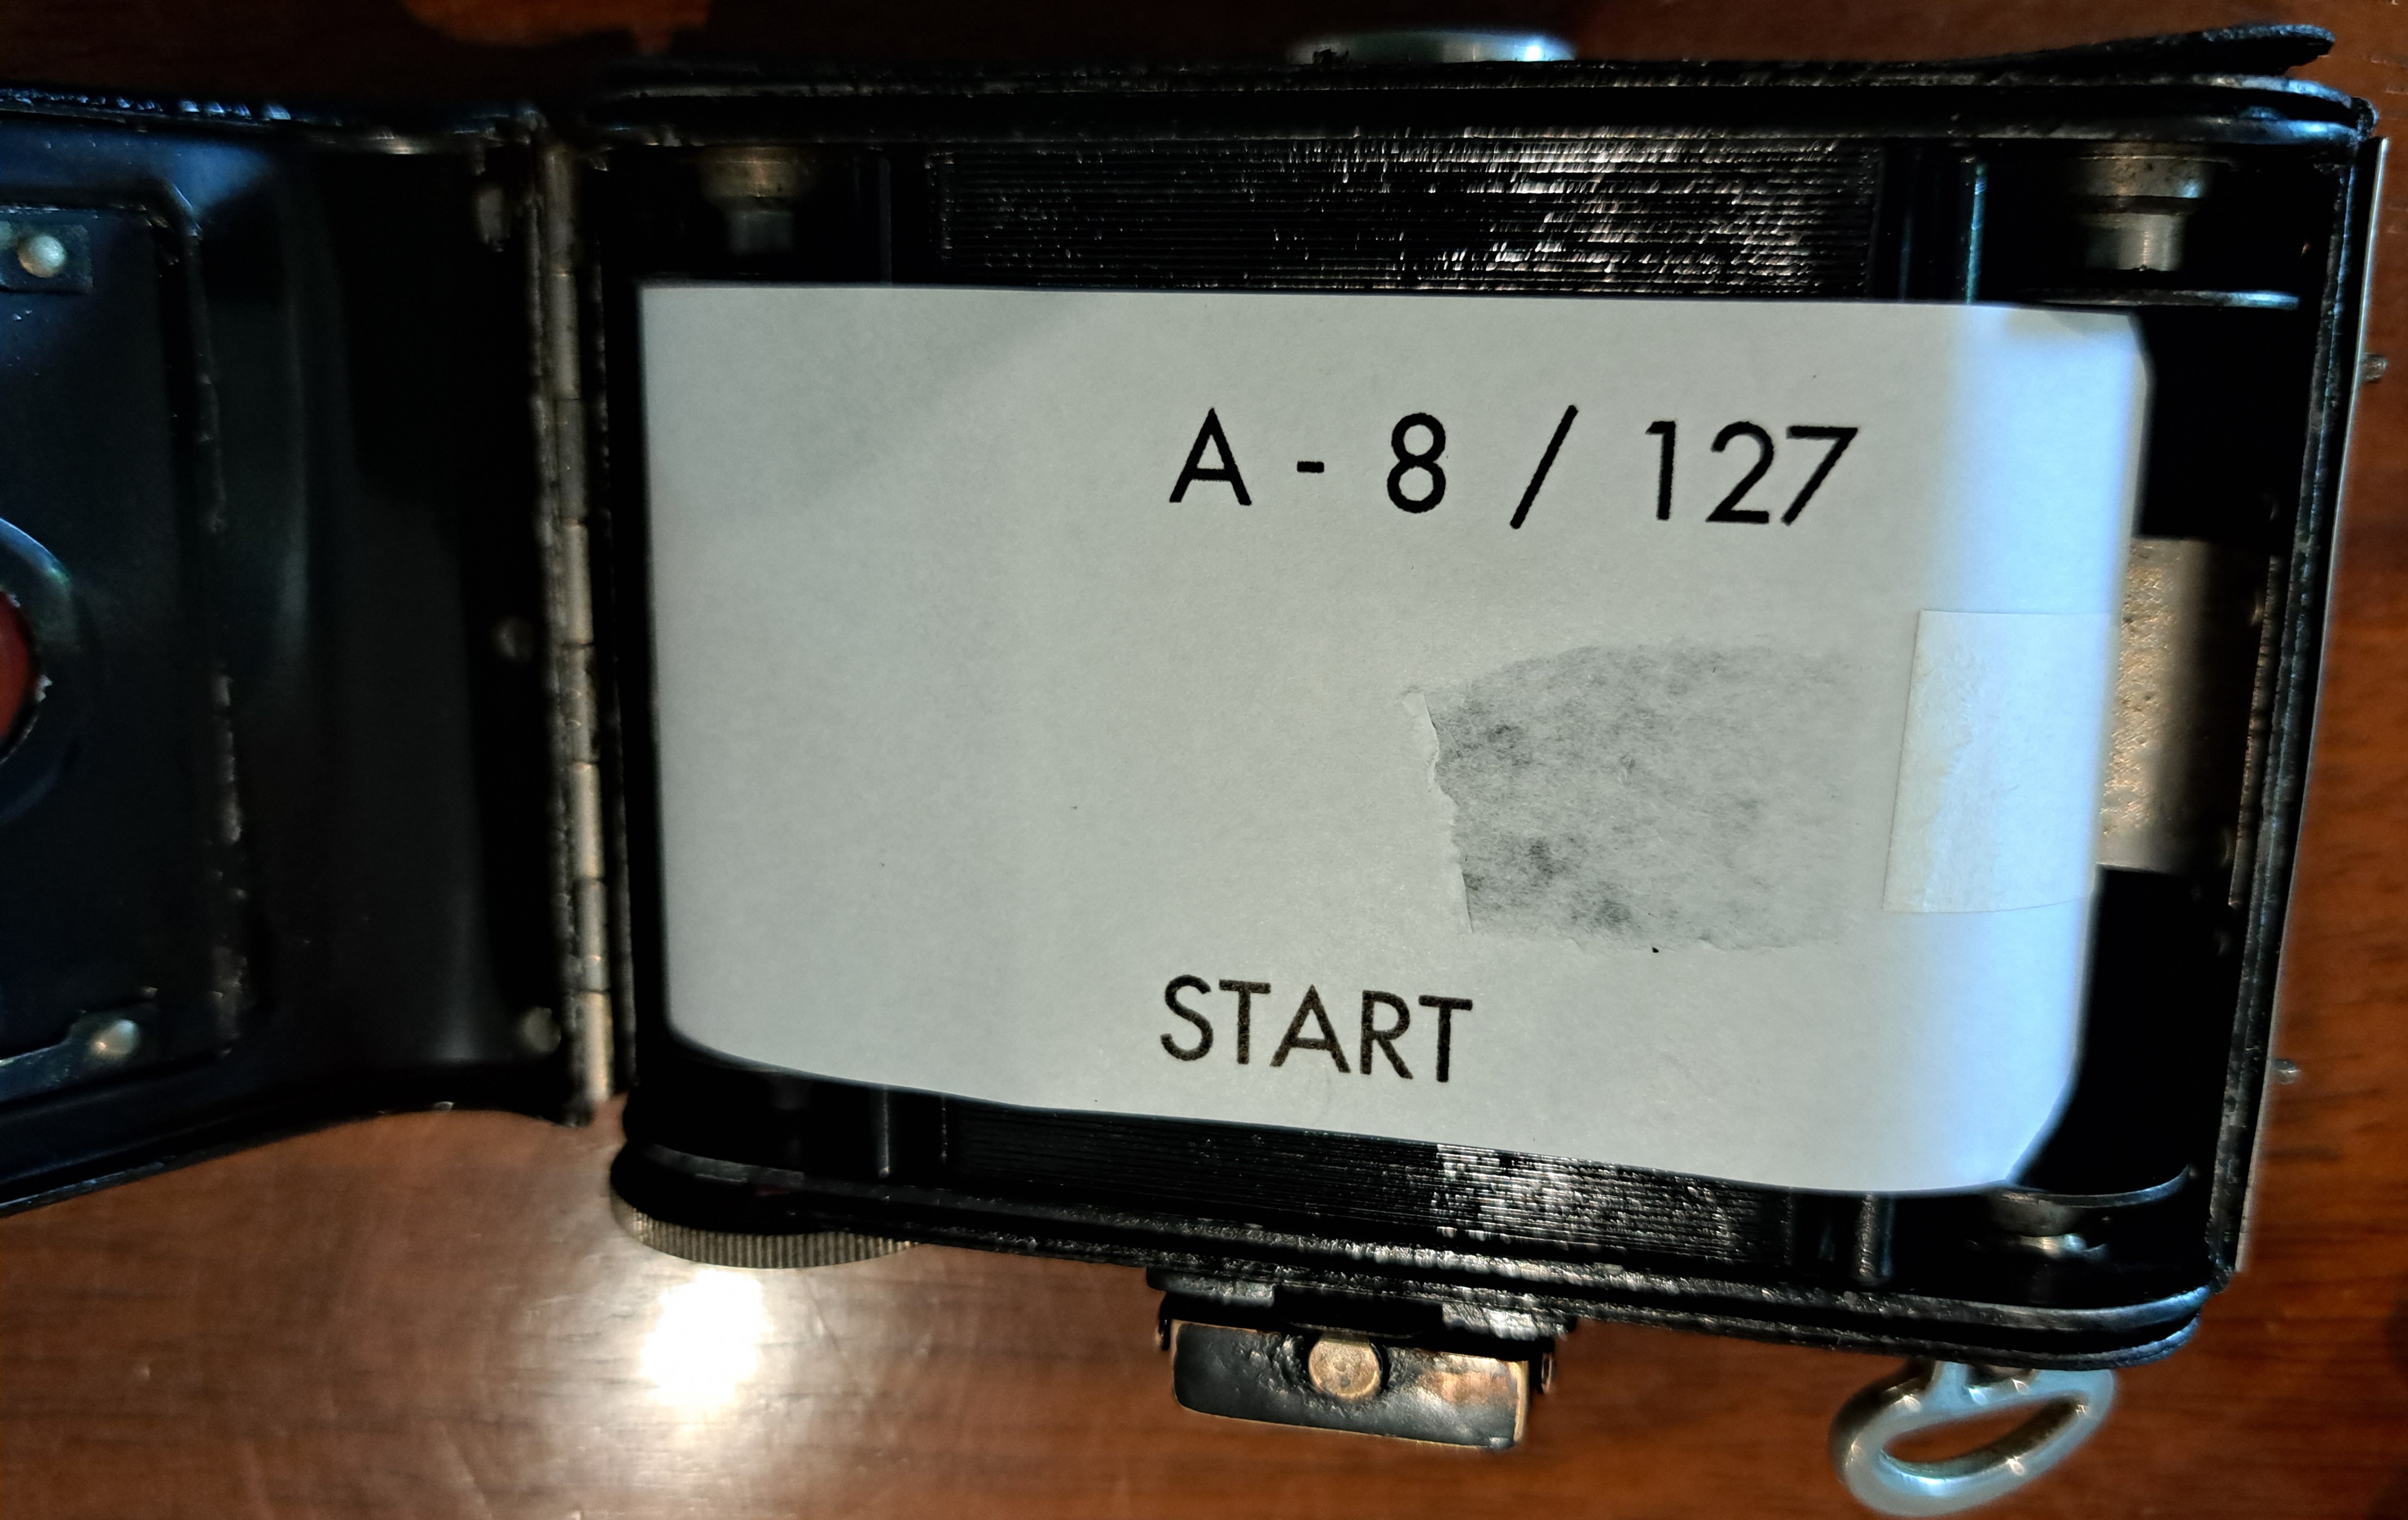 Small vintage folding camera with the back open and 127 film has been loaded into the take up spool. The backing paper has "A-8 / 127 START" printed on it.